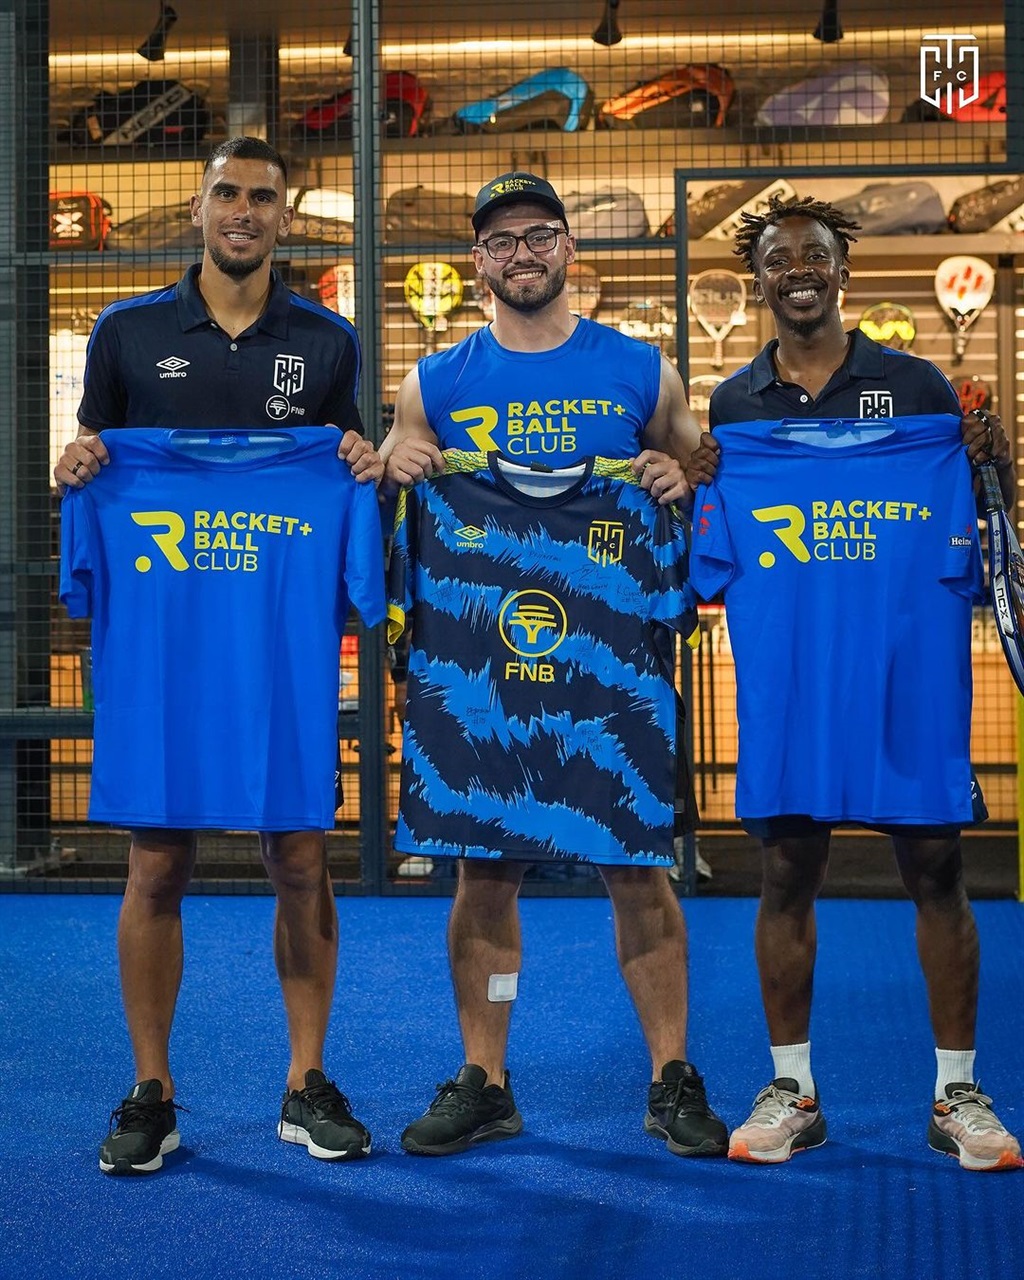 Cape Town City have crossed over with one of the world's fastest growing sports, padel, with the club's first team players getting deep into the action.